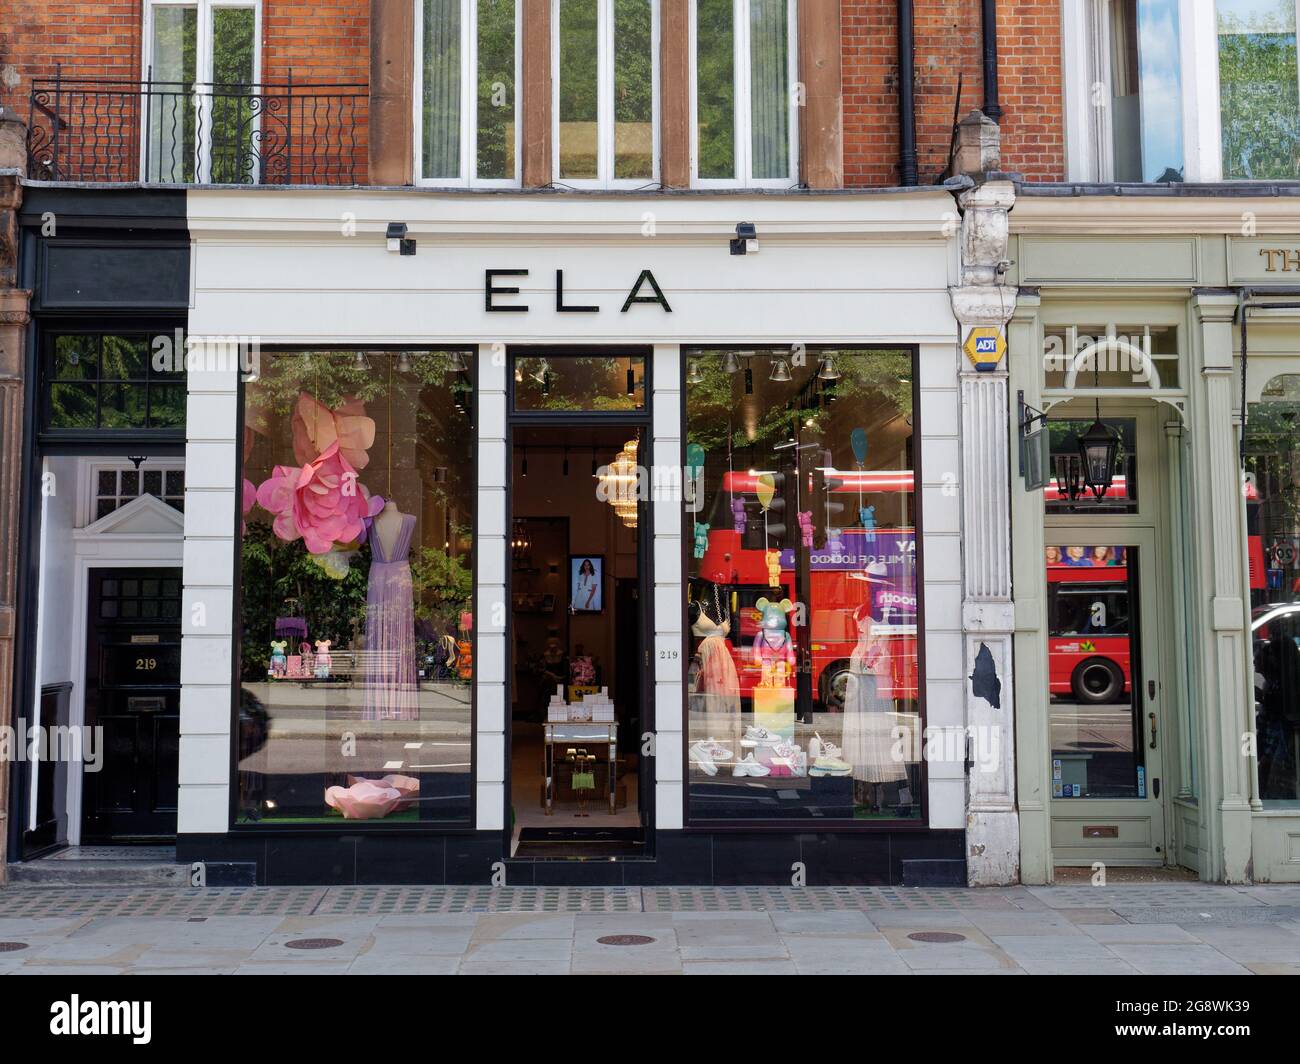 London, Greater London, England, June 12 2021: Red bus reflecting in the window of Ela fashion clothing store in Knightsbridge. Stock Photo